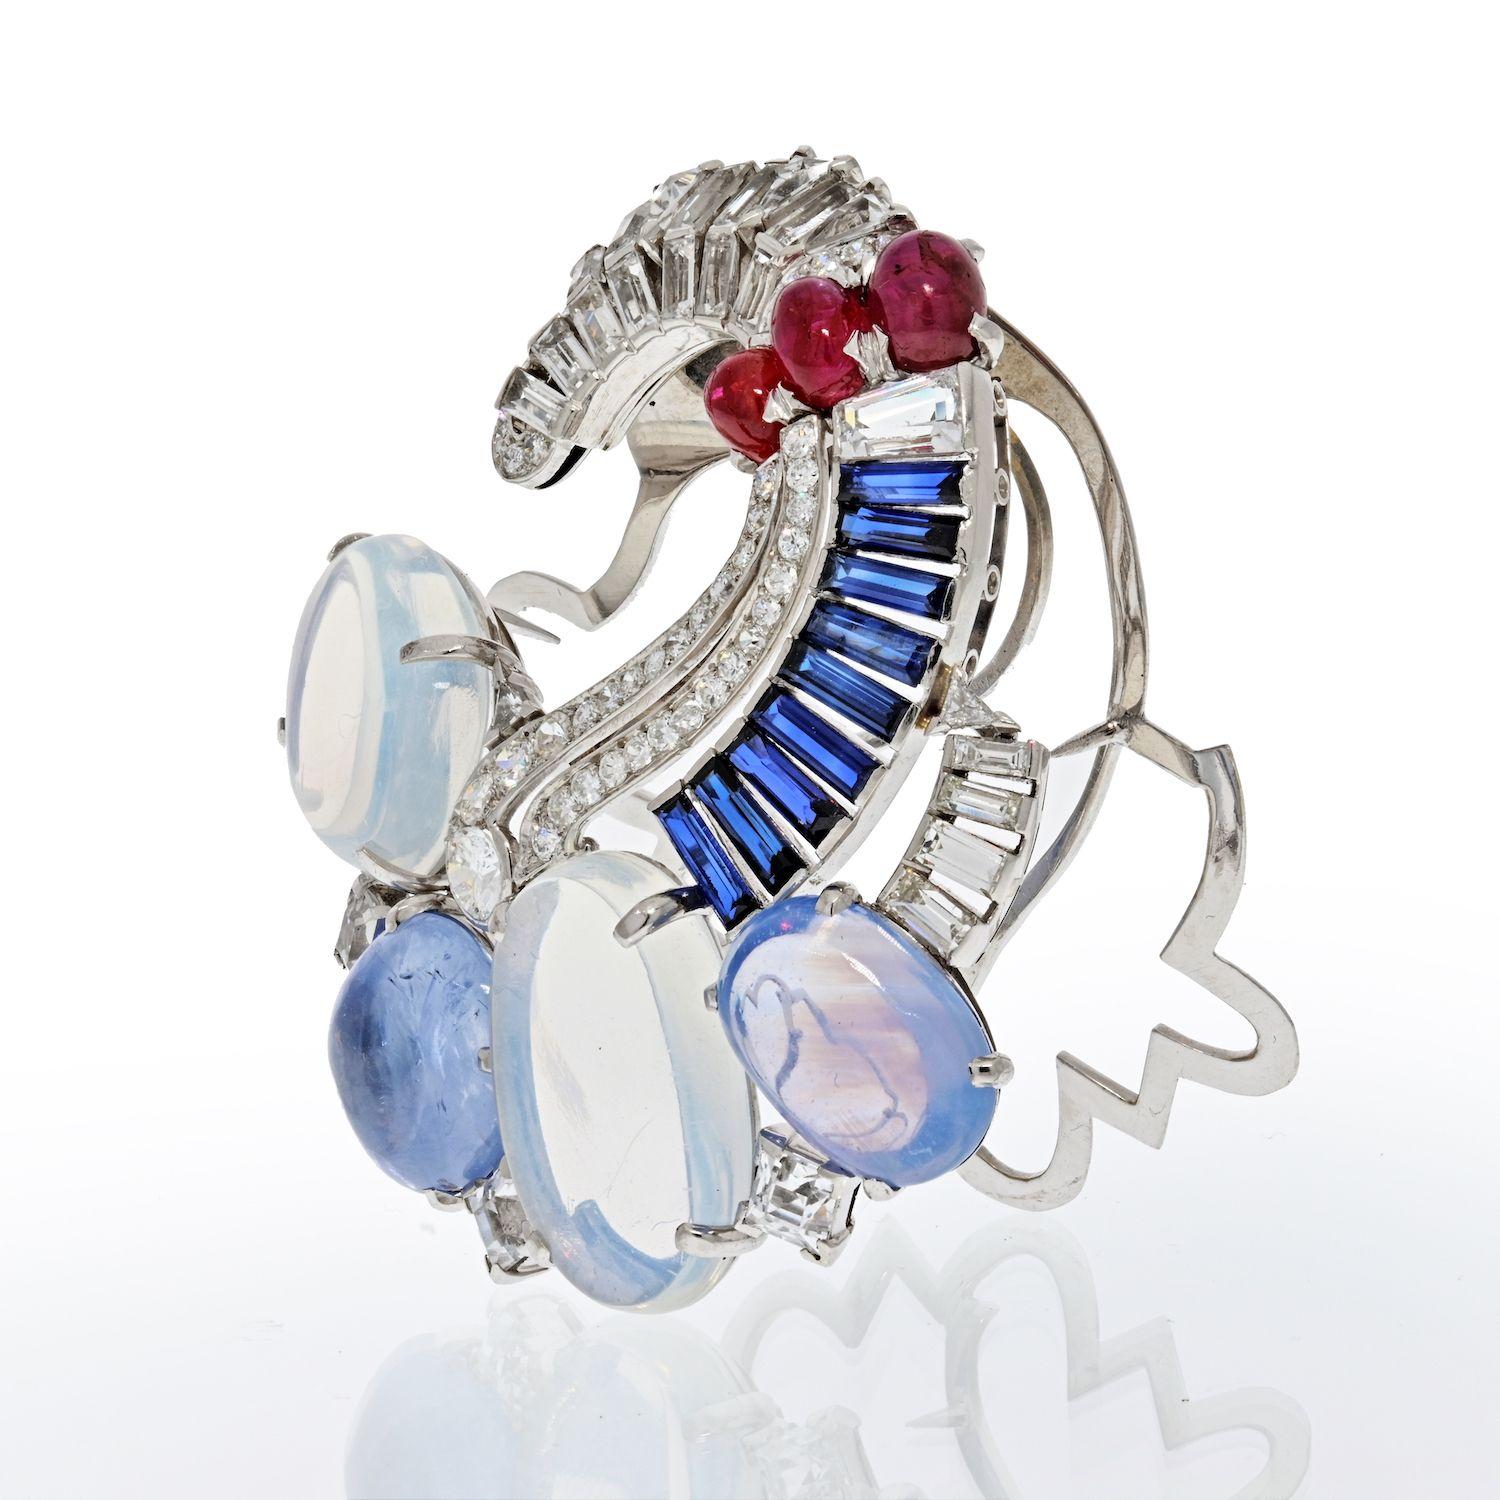 Absolutely stunning and one of a kind Seaman Schepps brooch with moonstone, diamonds, sapphires and rubies. Crafted from 18K white gold with 14K white gold clip. Lively color gemstones such as two large cabochon moonstones approx. 26.00 carats